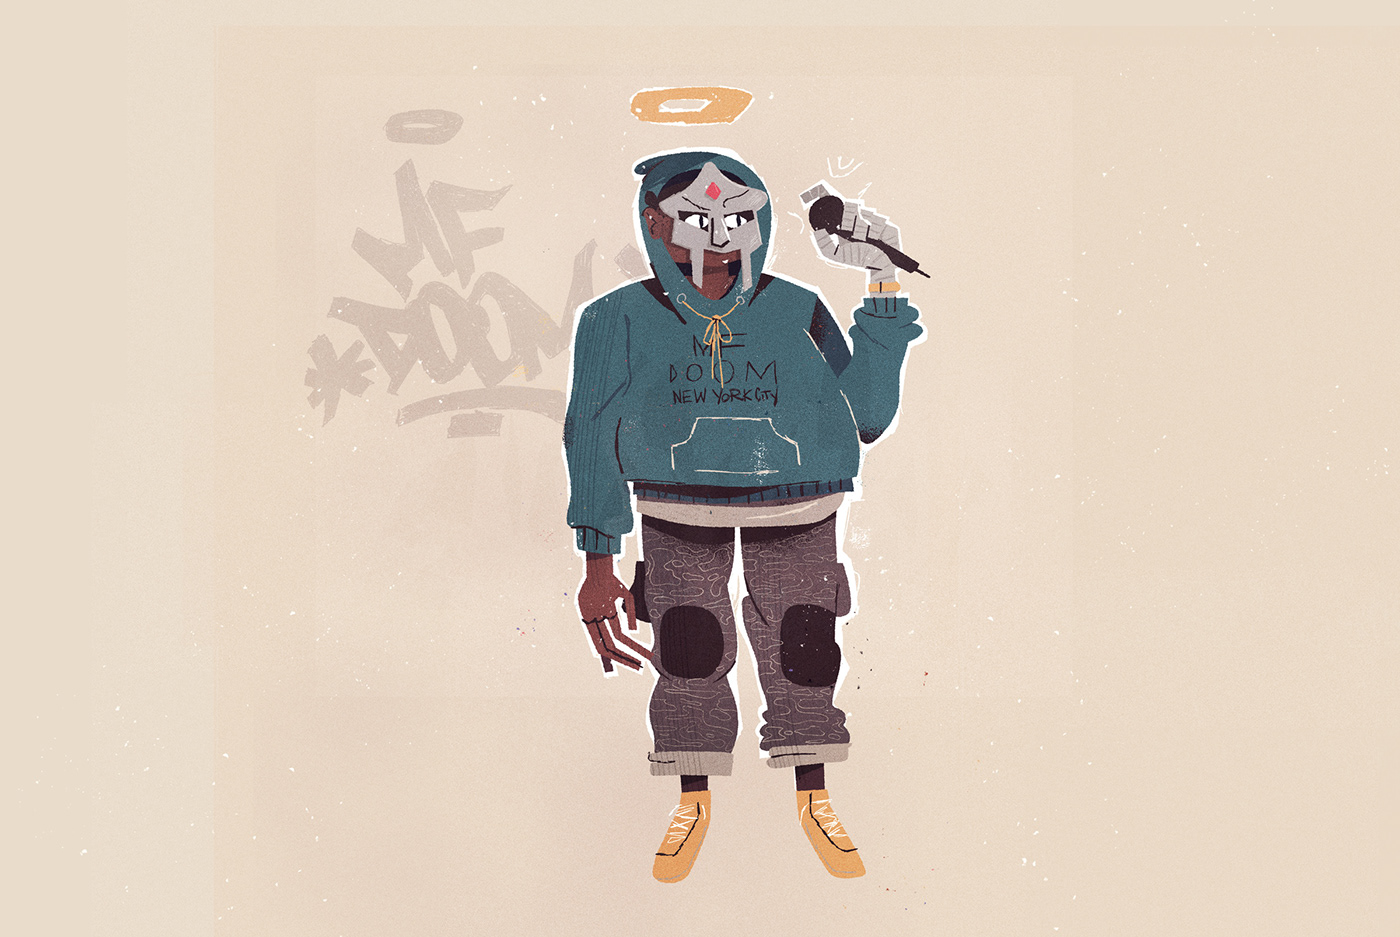 MF DOOM drawn In a flat illustration style, with a halo over his head.